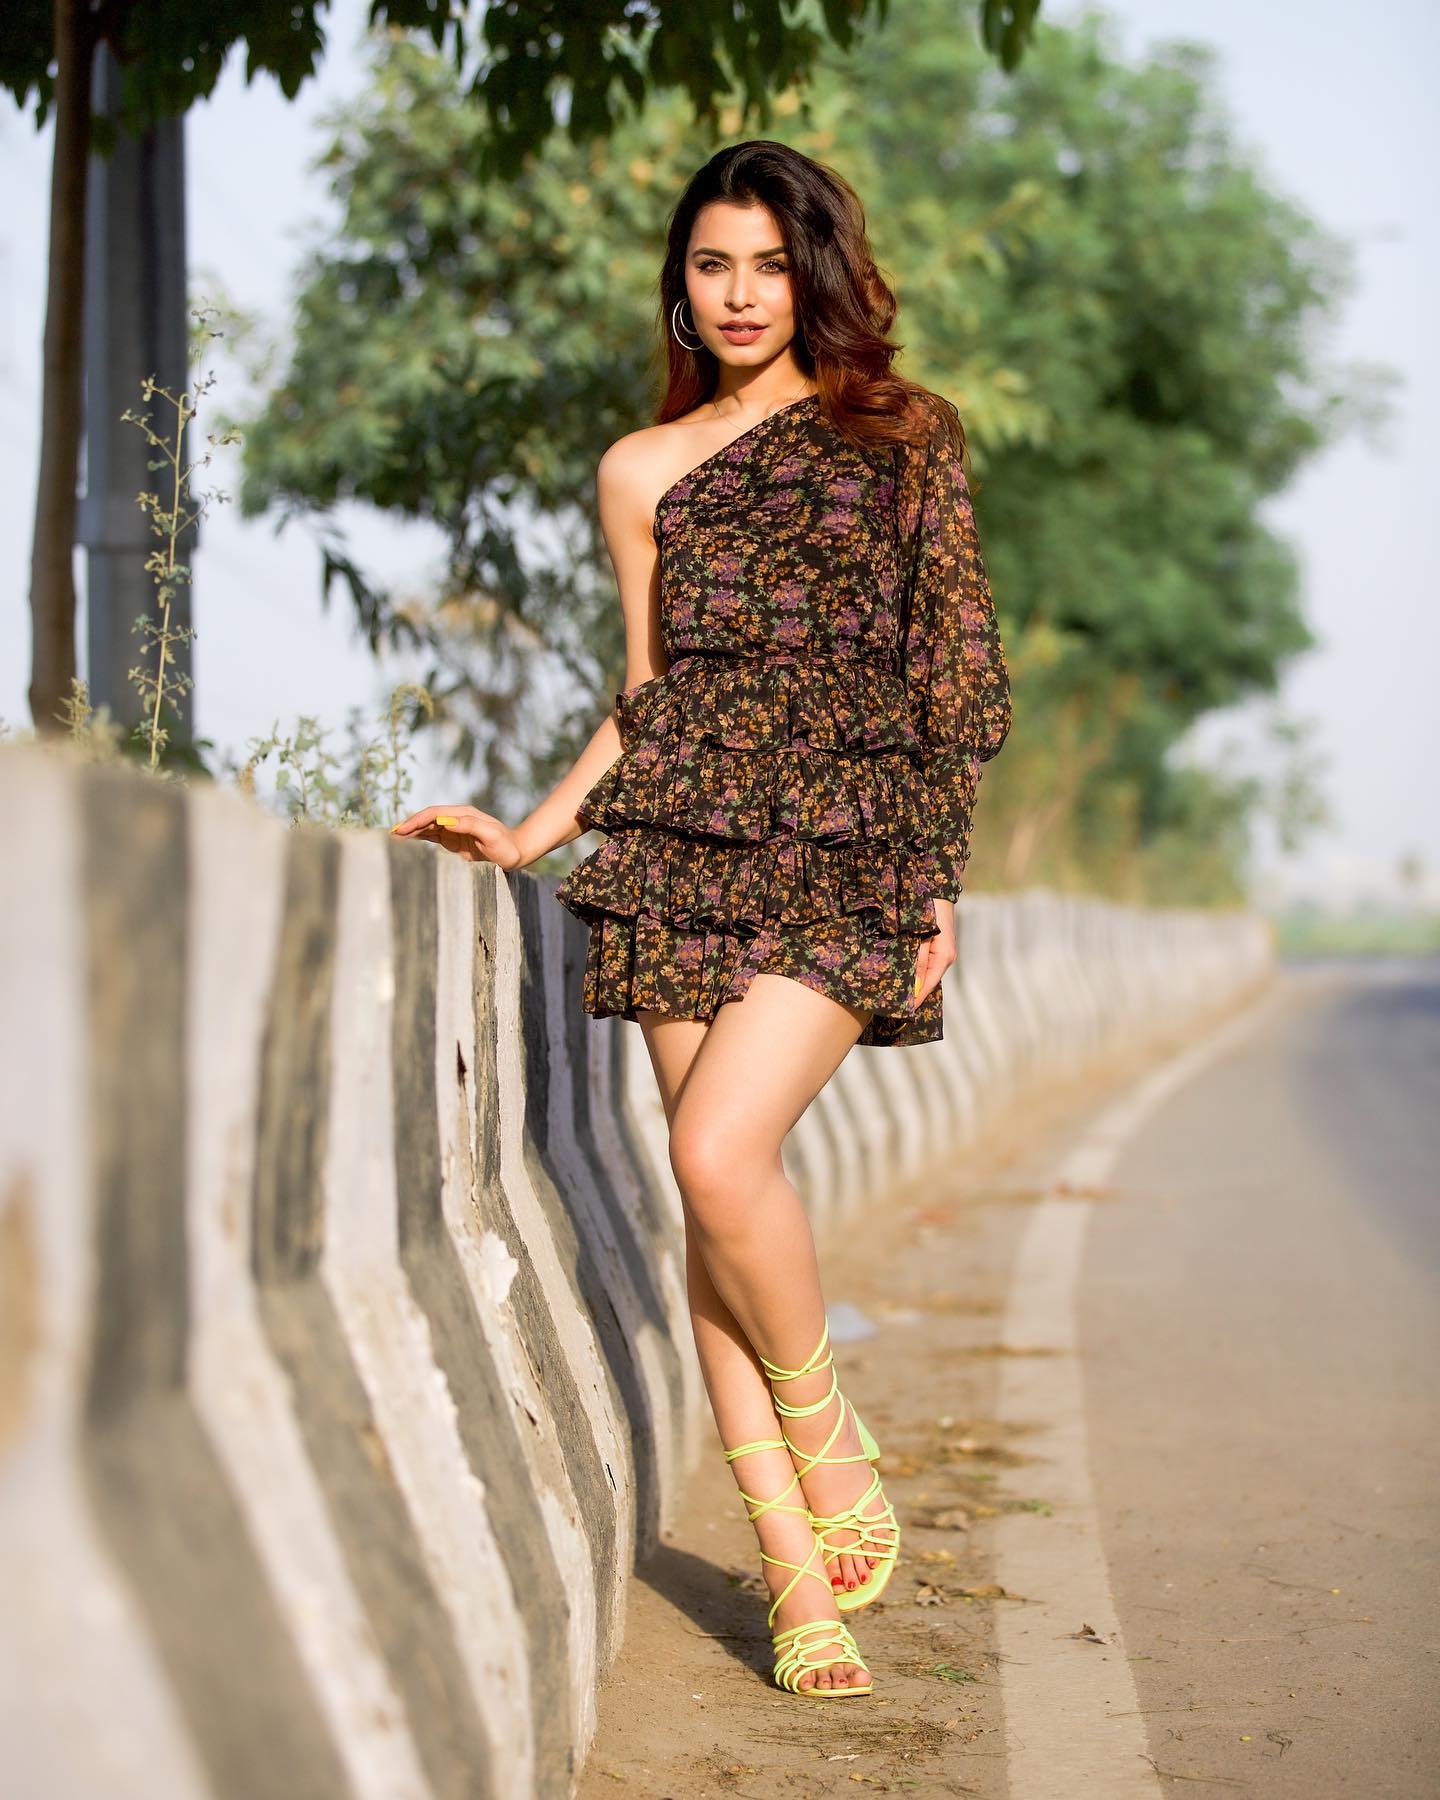 Chitranshi Dhyani flashes her legs in Photoshoot Done by Akarsh Mathur, May 2022